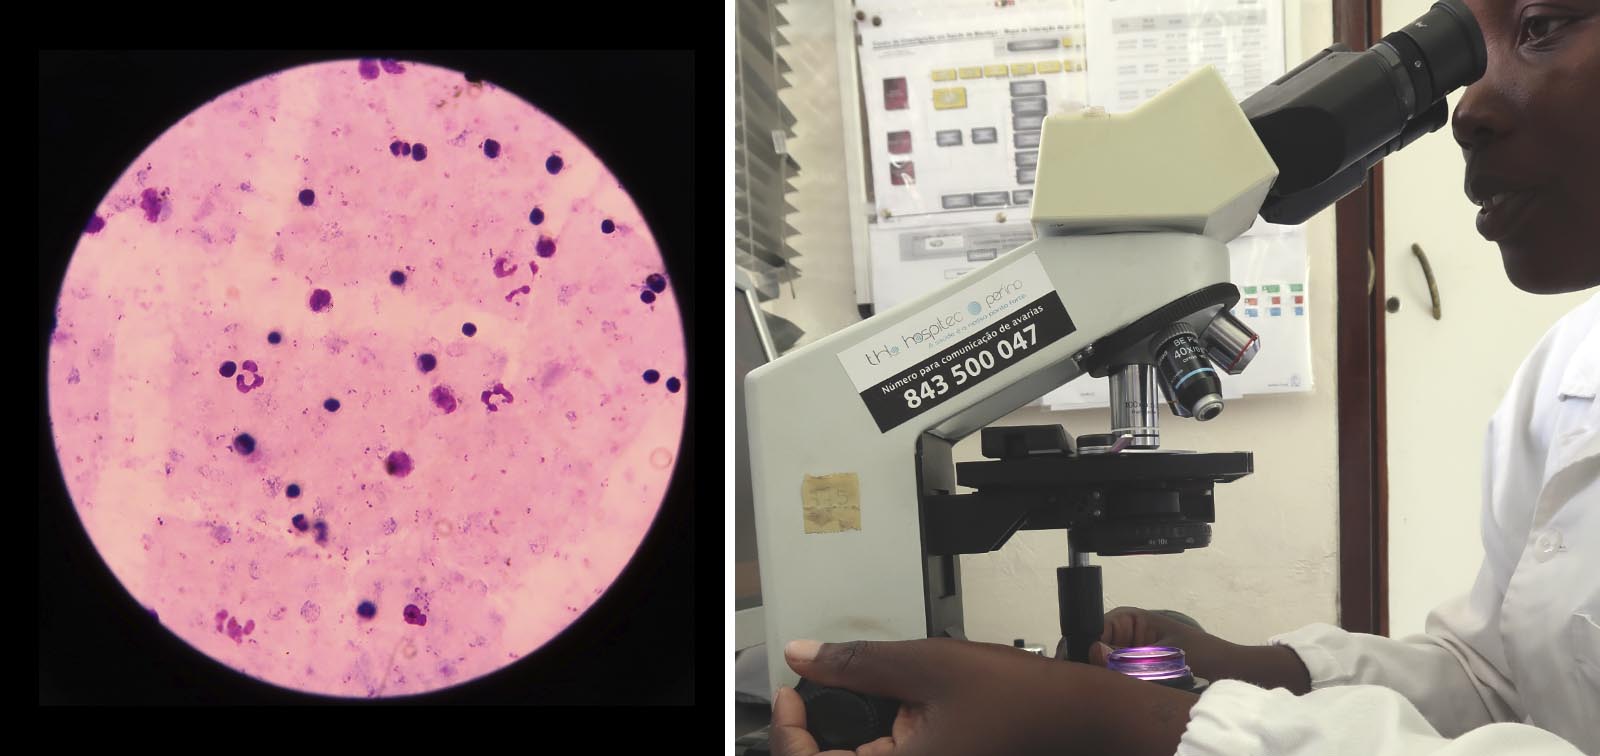 CISM researcher observes malaria parasite in blood under a microscope